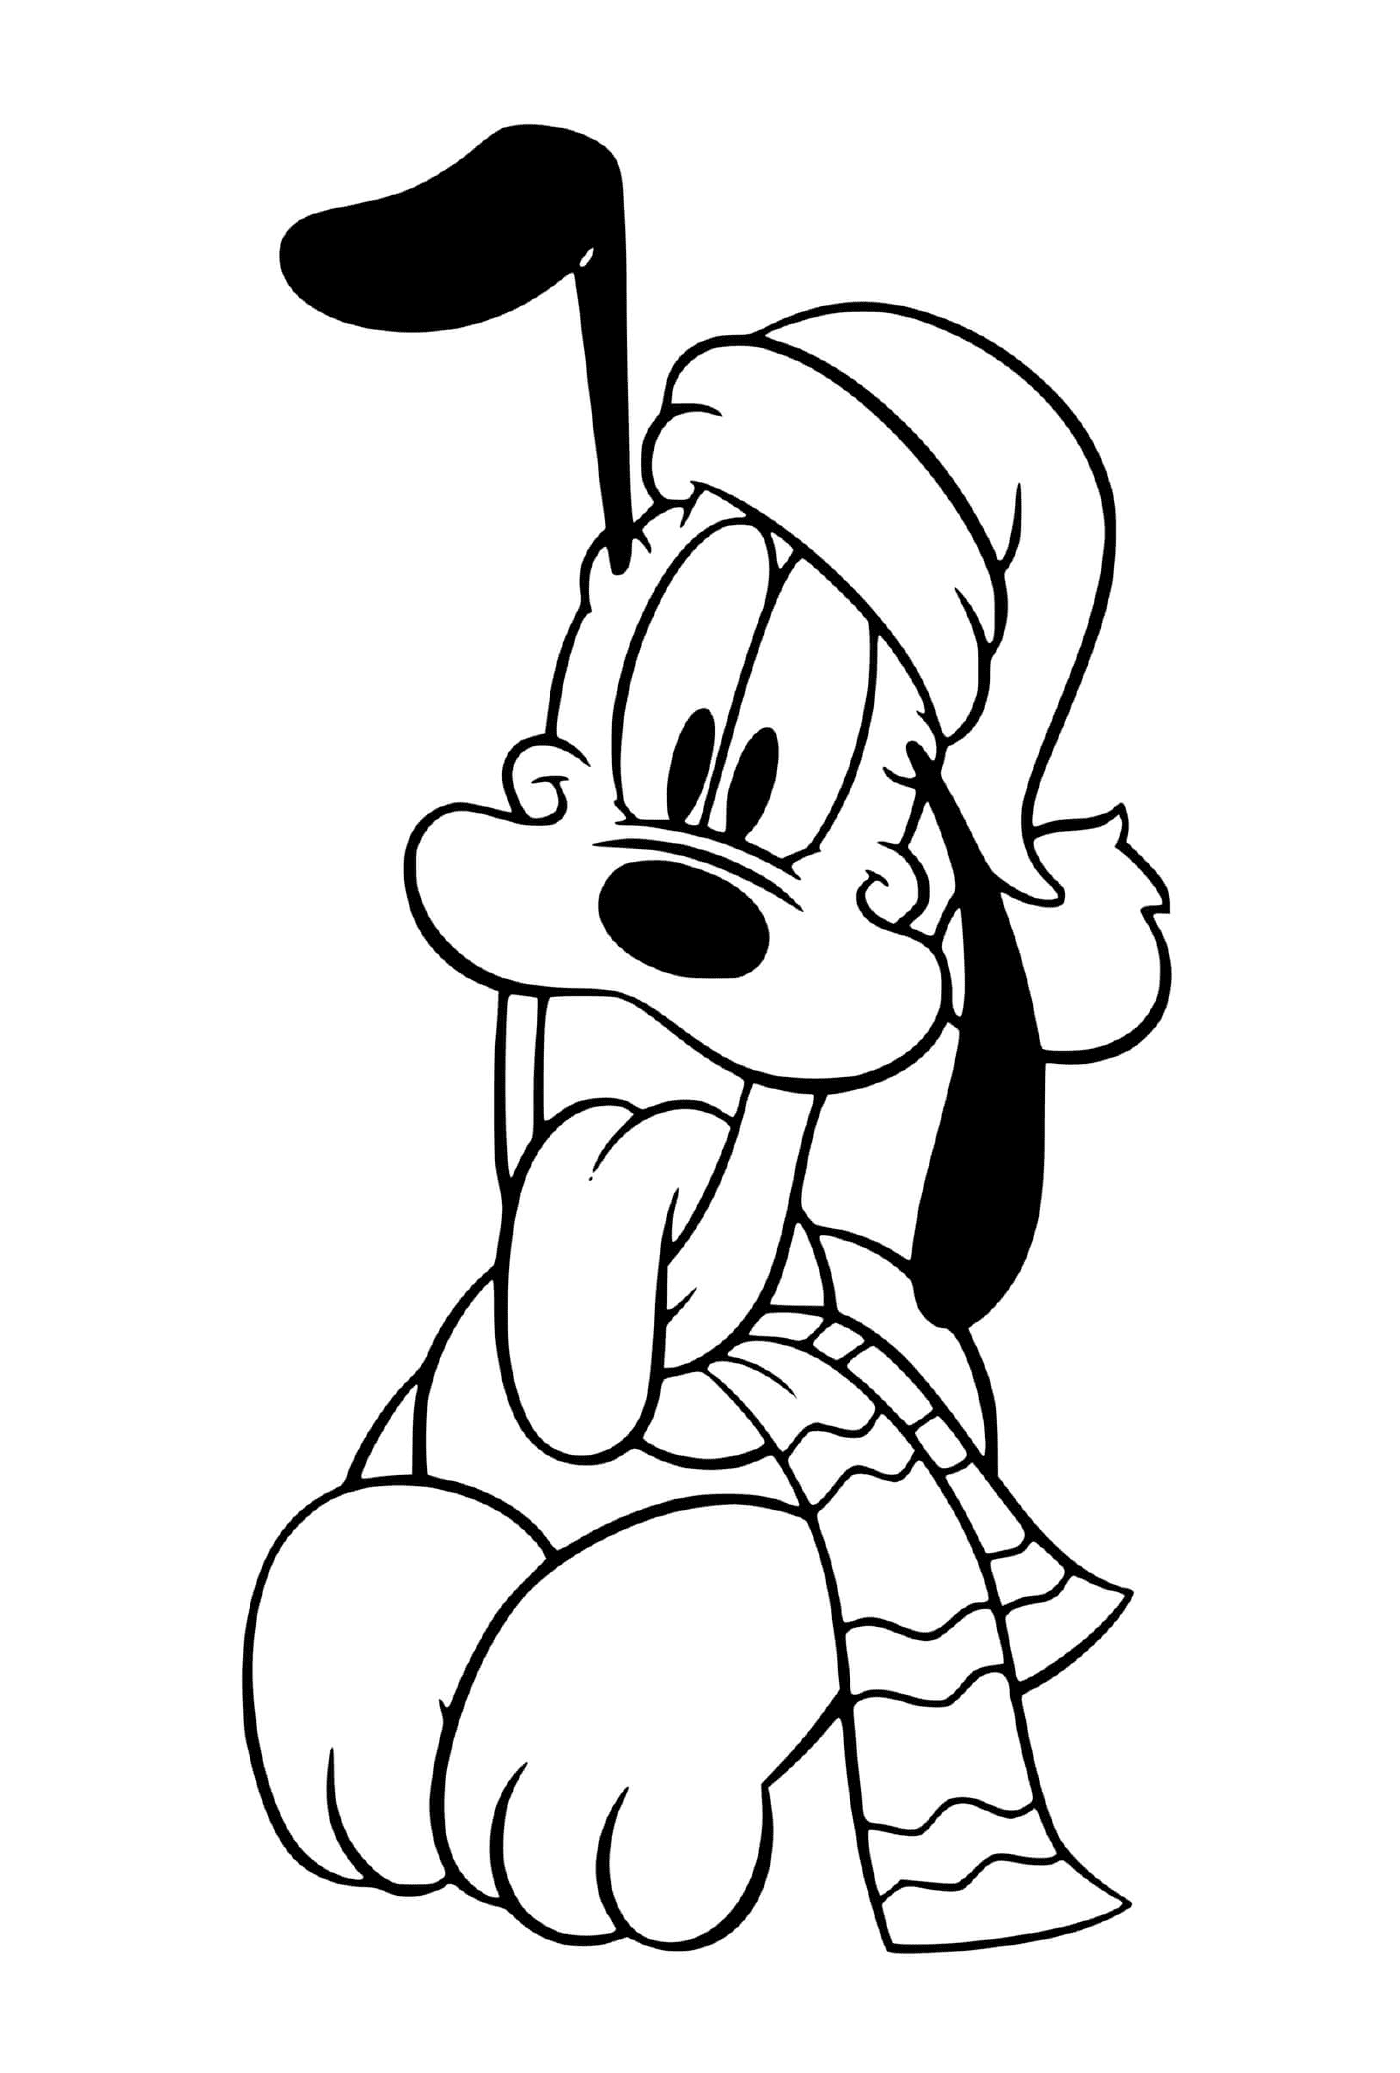  Pluto with cap and scarf 